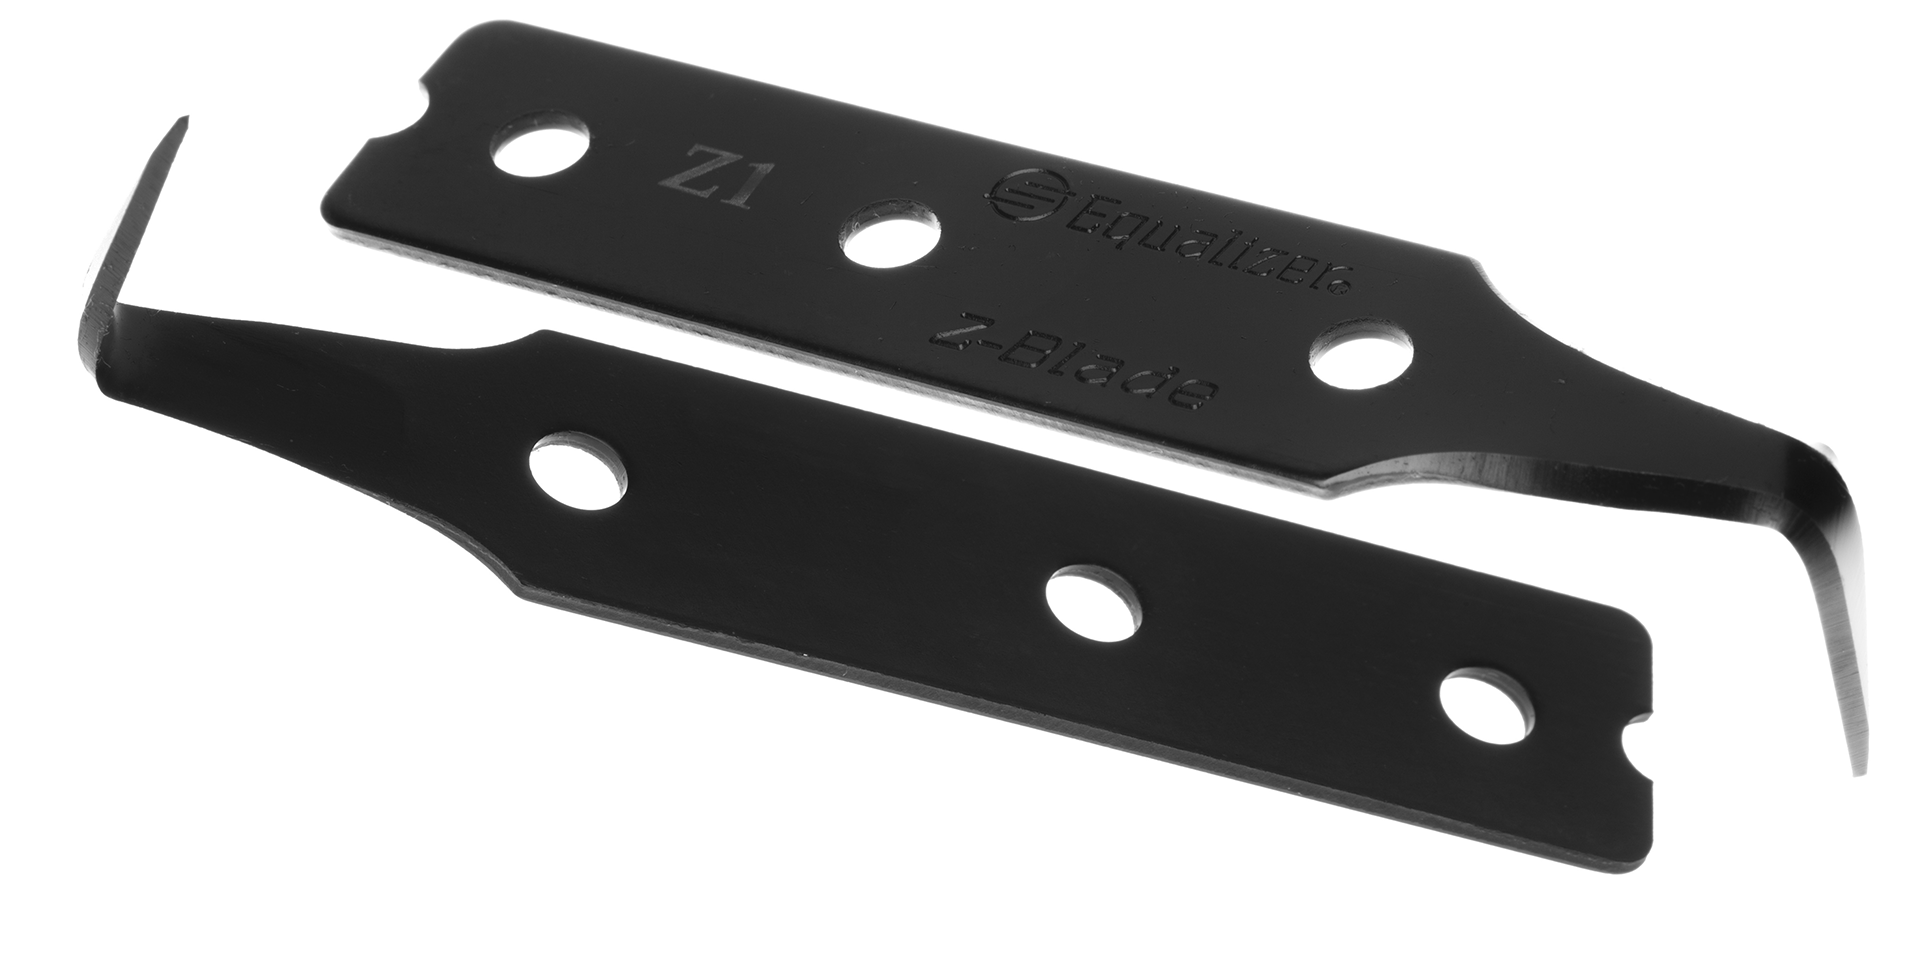 Equalizer Z COINED COLD KNIFE BLADES for windshield Removal blade.